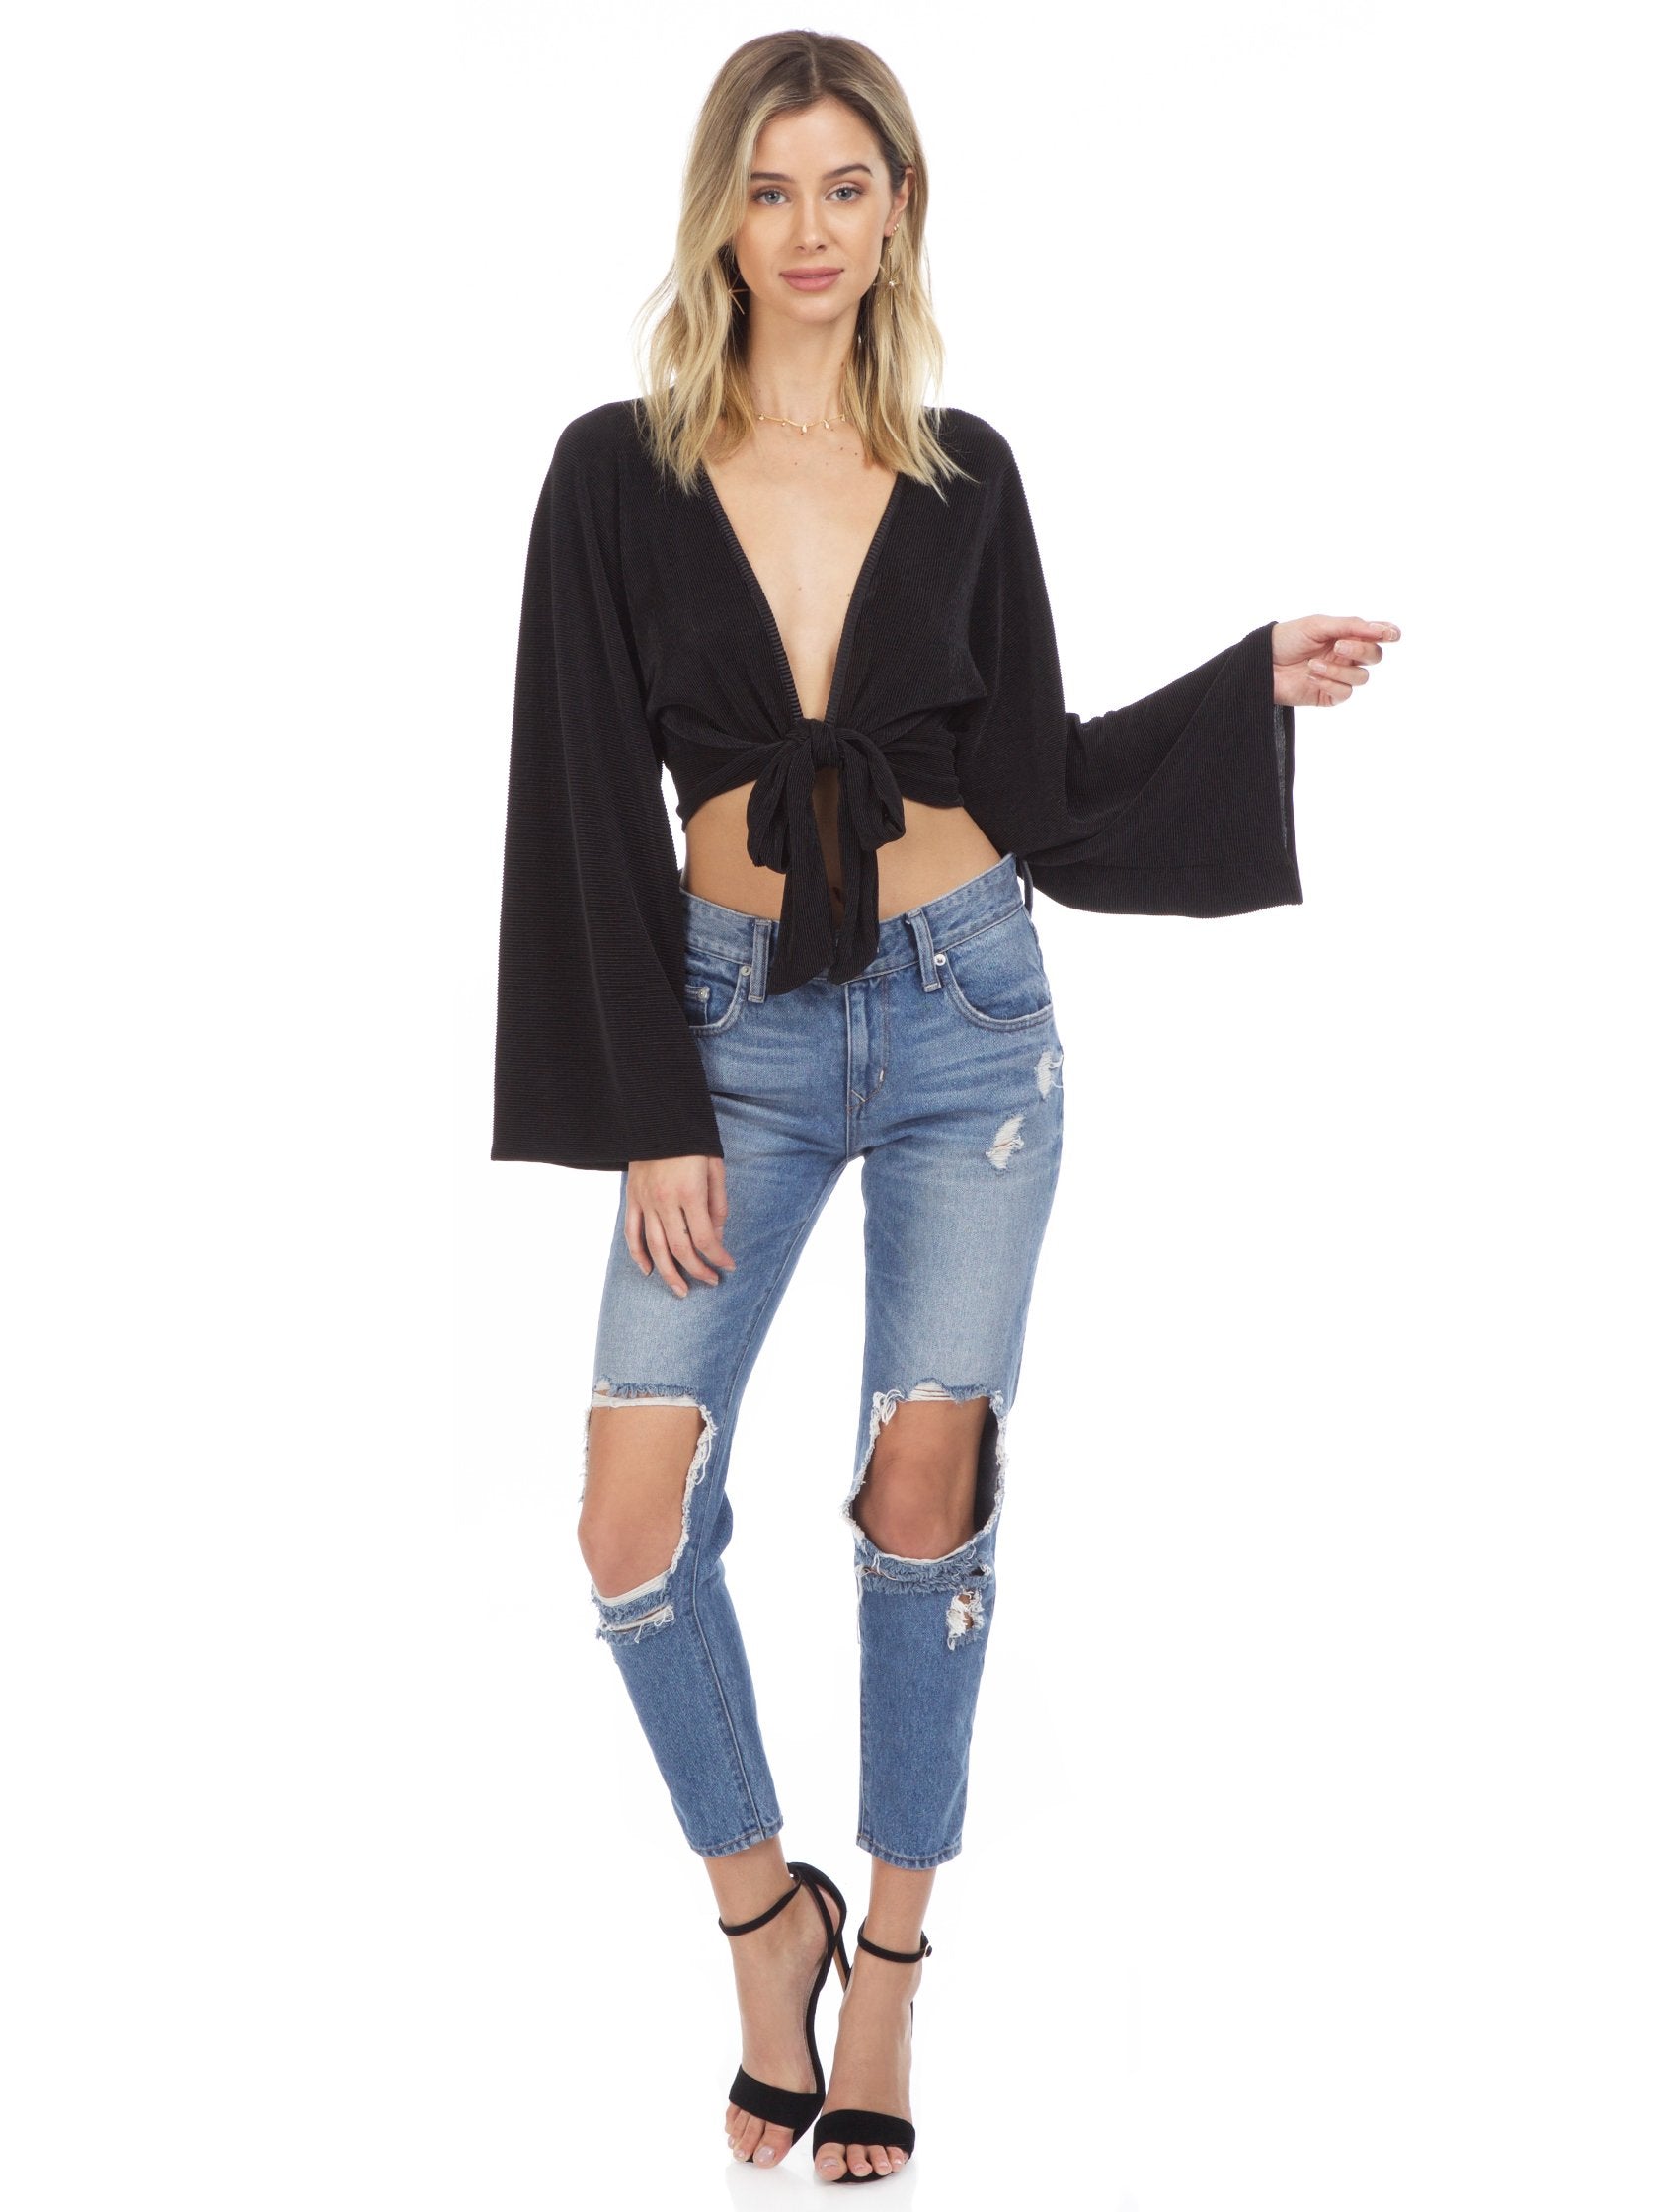 Girl wearing a top rental from Blue Life called Crystal Pleated Kimono Tie Front Top